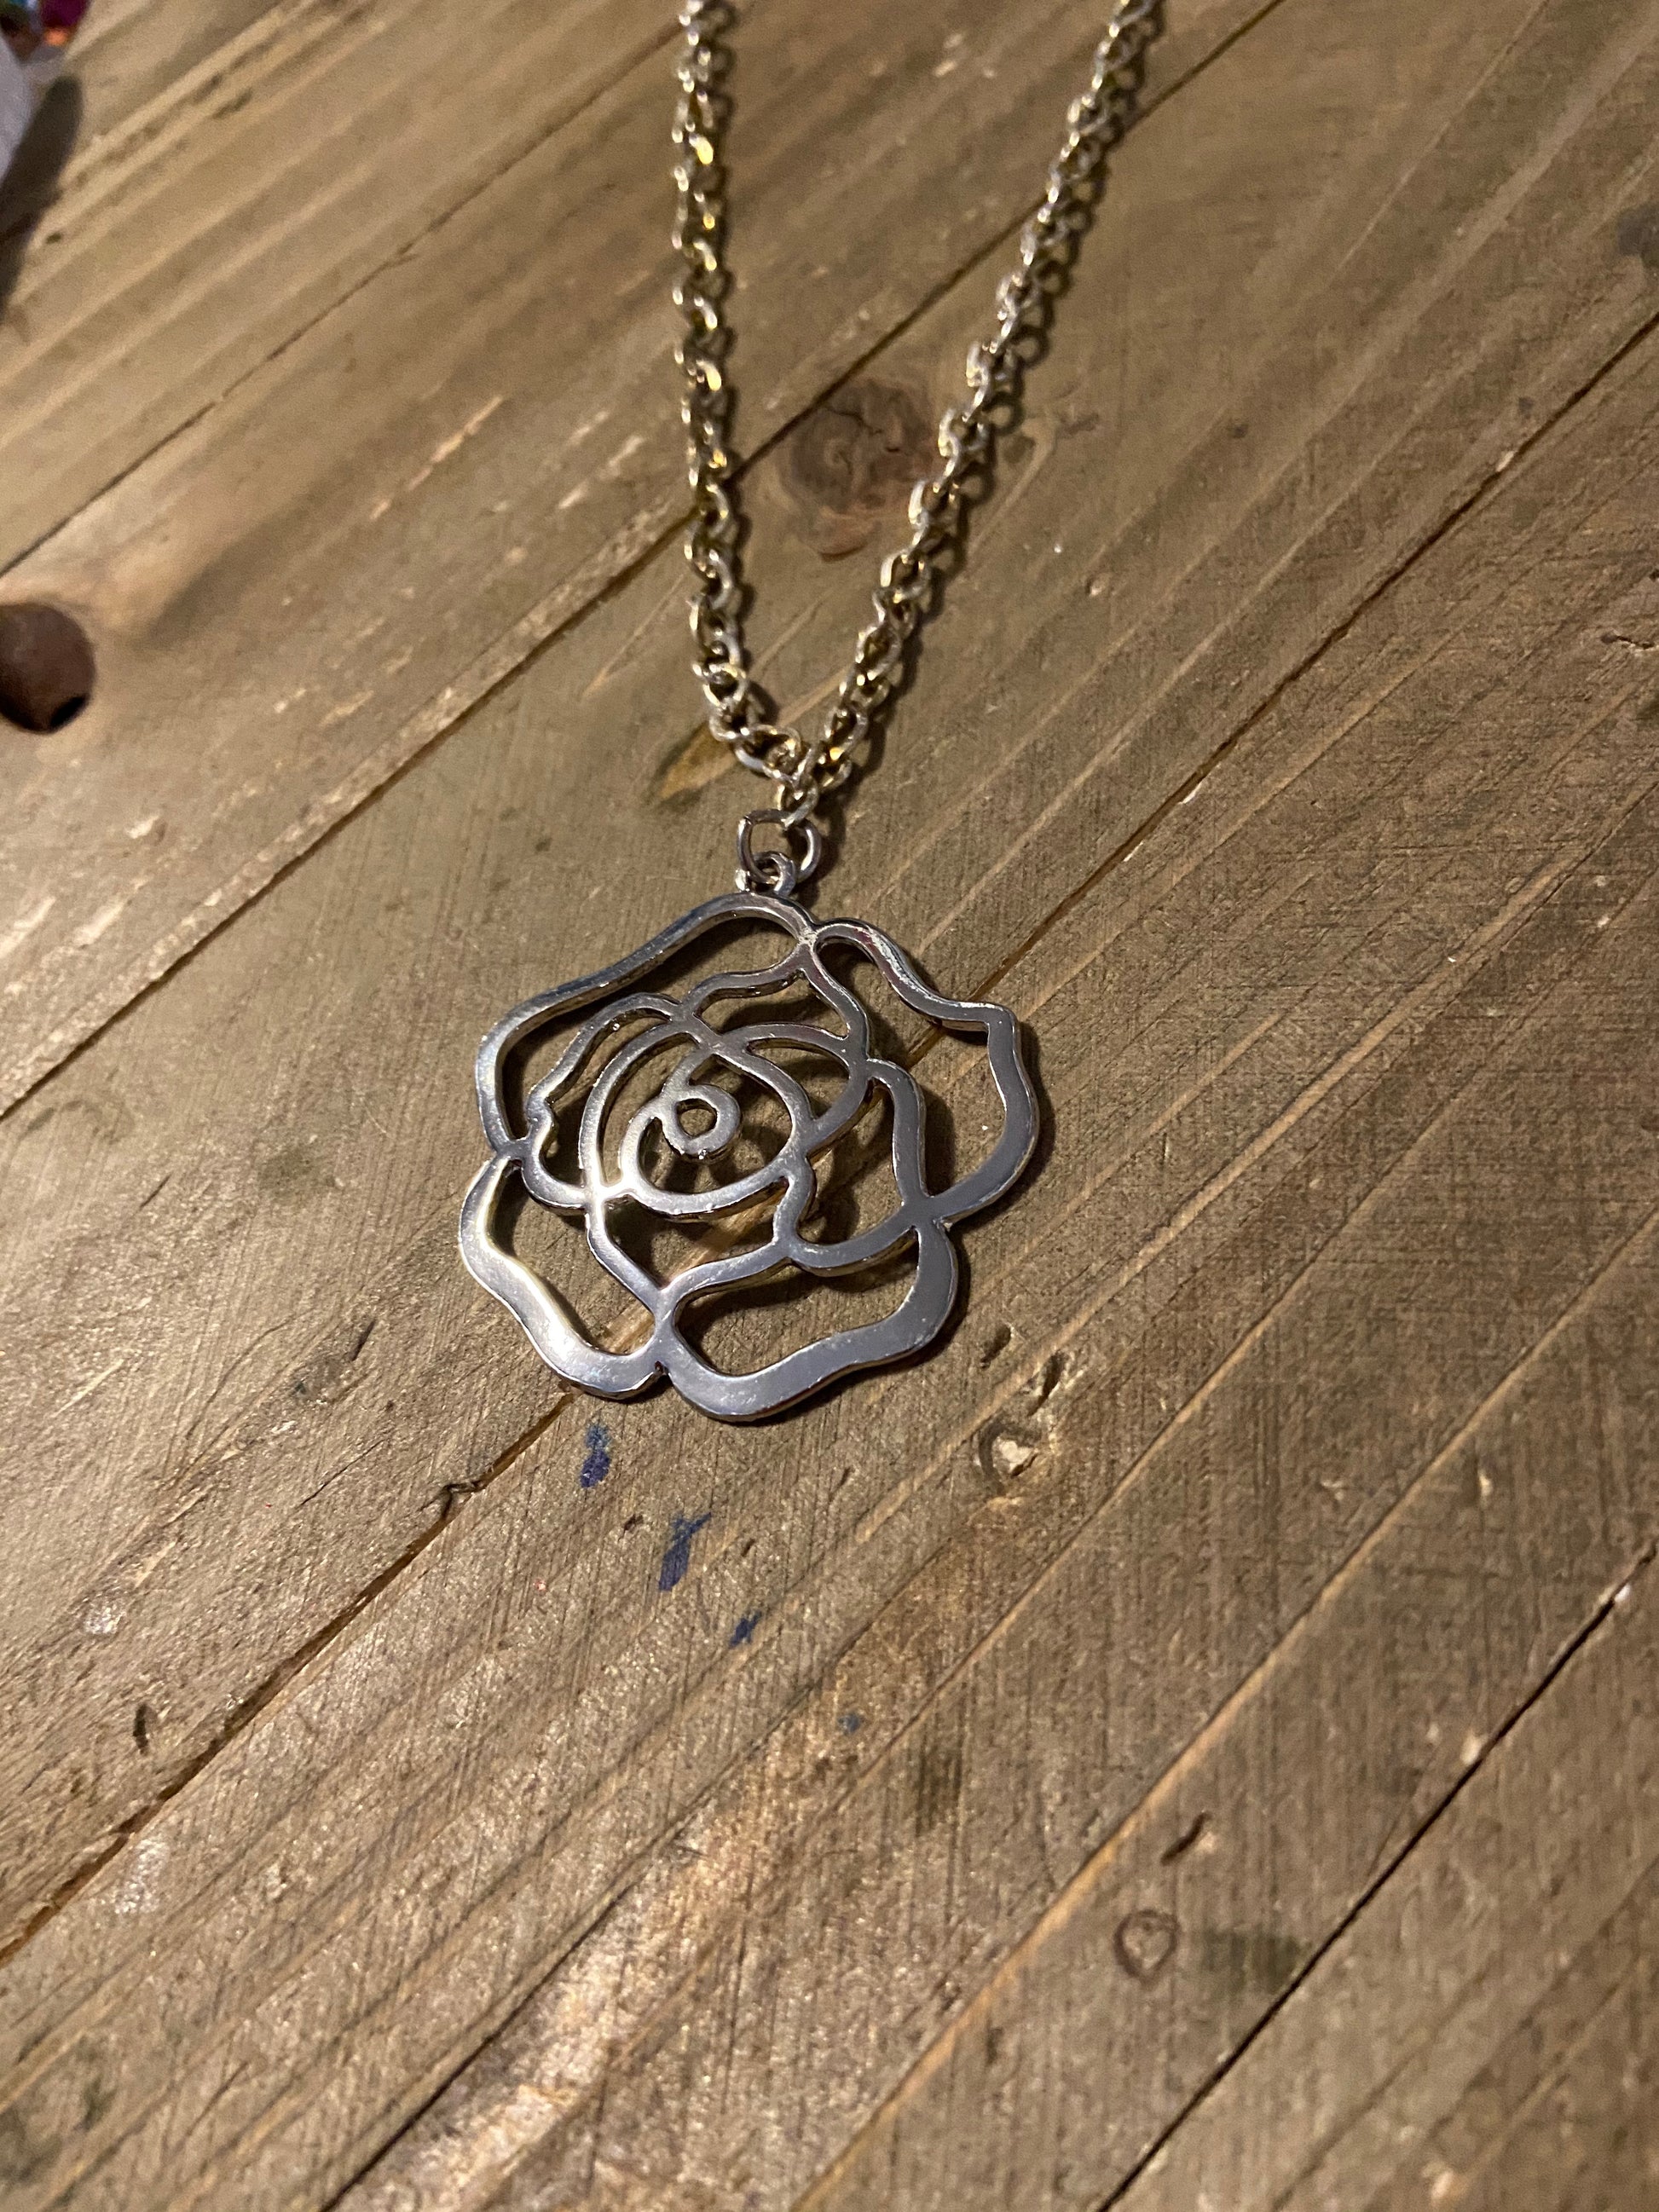 Silver Chain Necklace with A Rose outline PendantPink tiful of LOVE